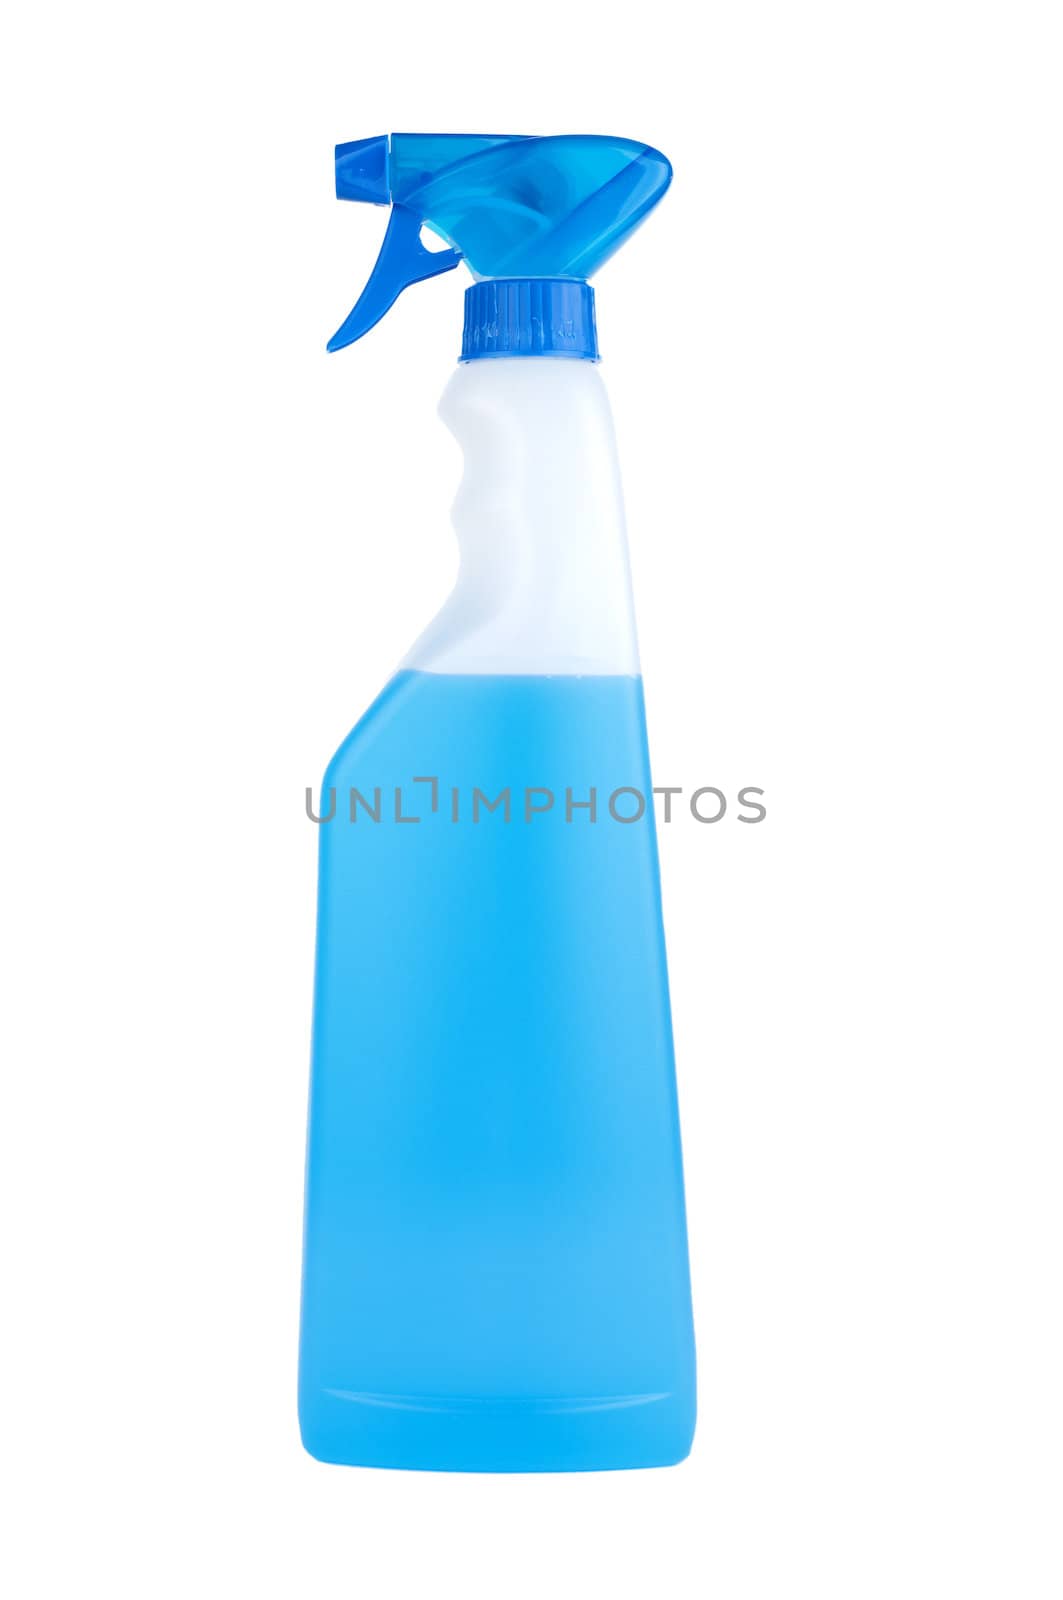 Spray Bottle of a Cleaning Product isolated on white